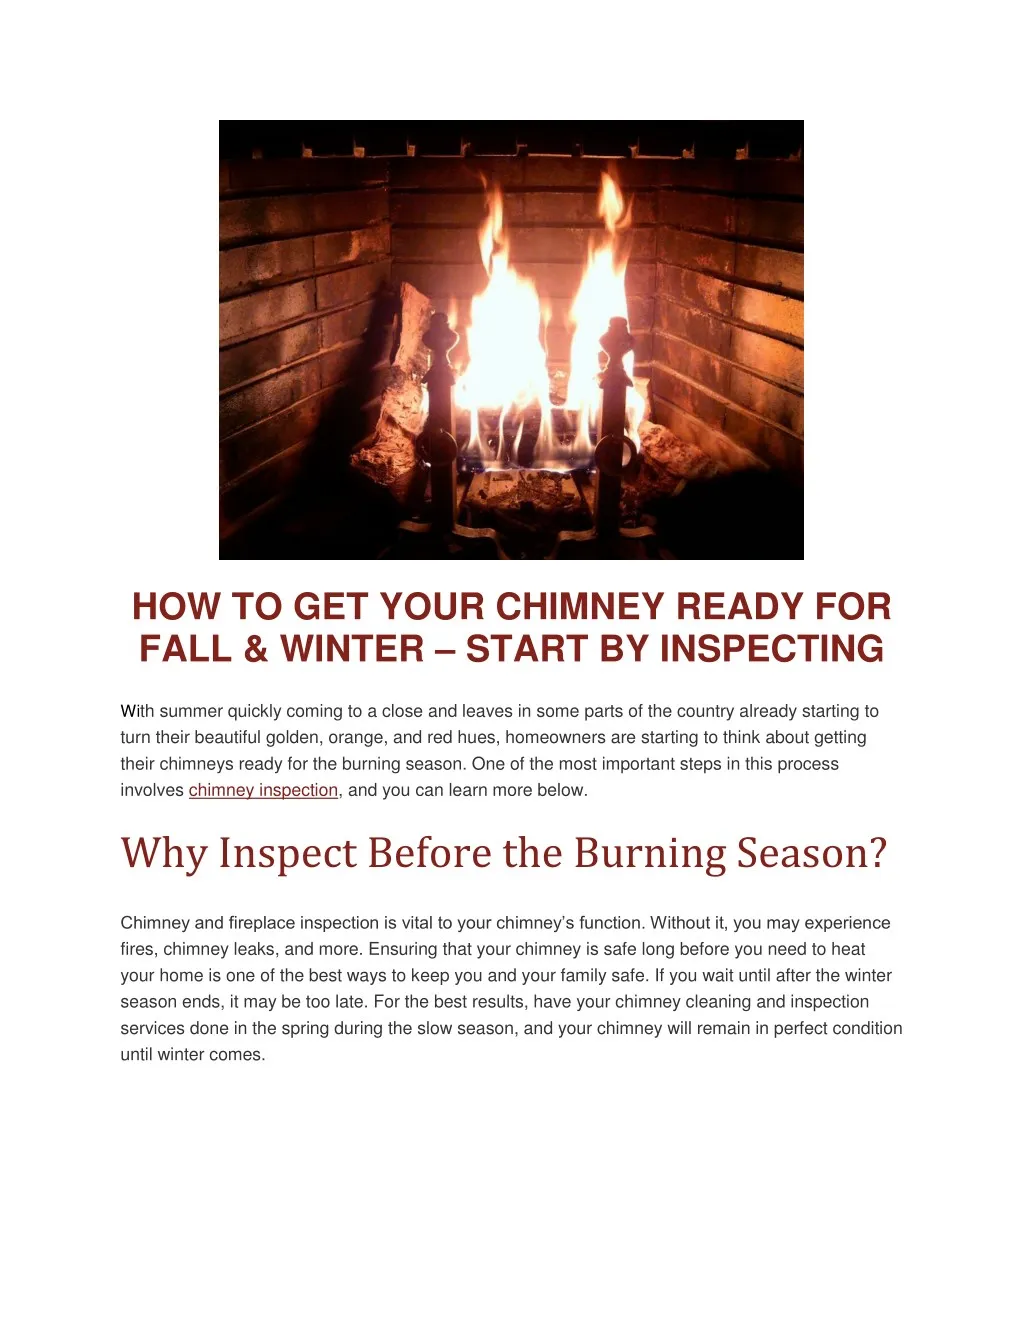 how to get your chimney ready for fall winter